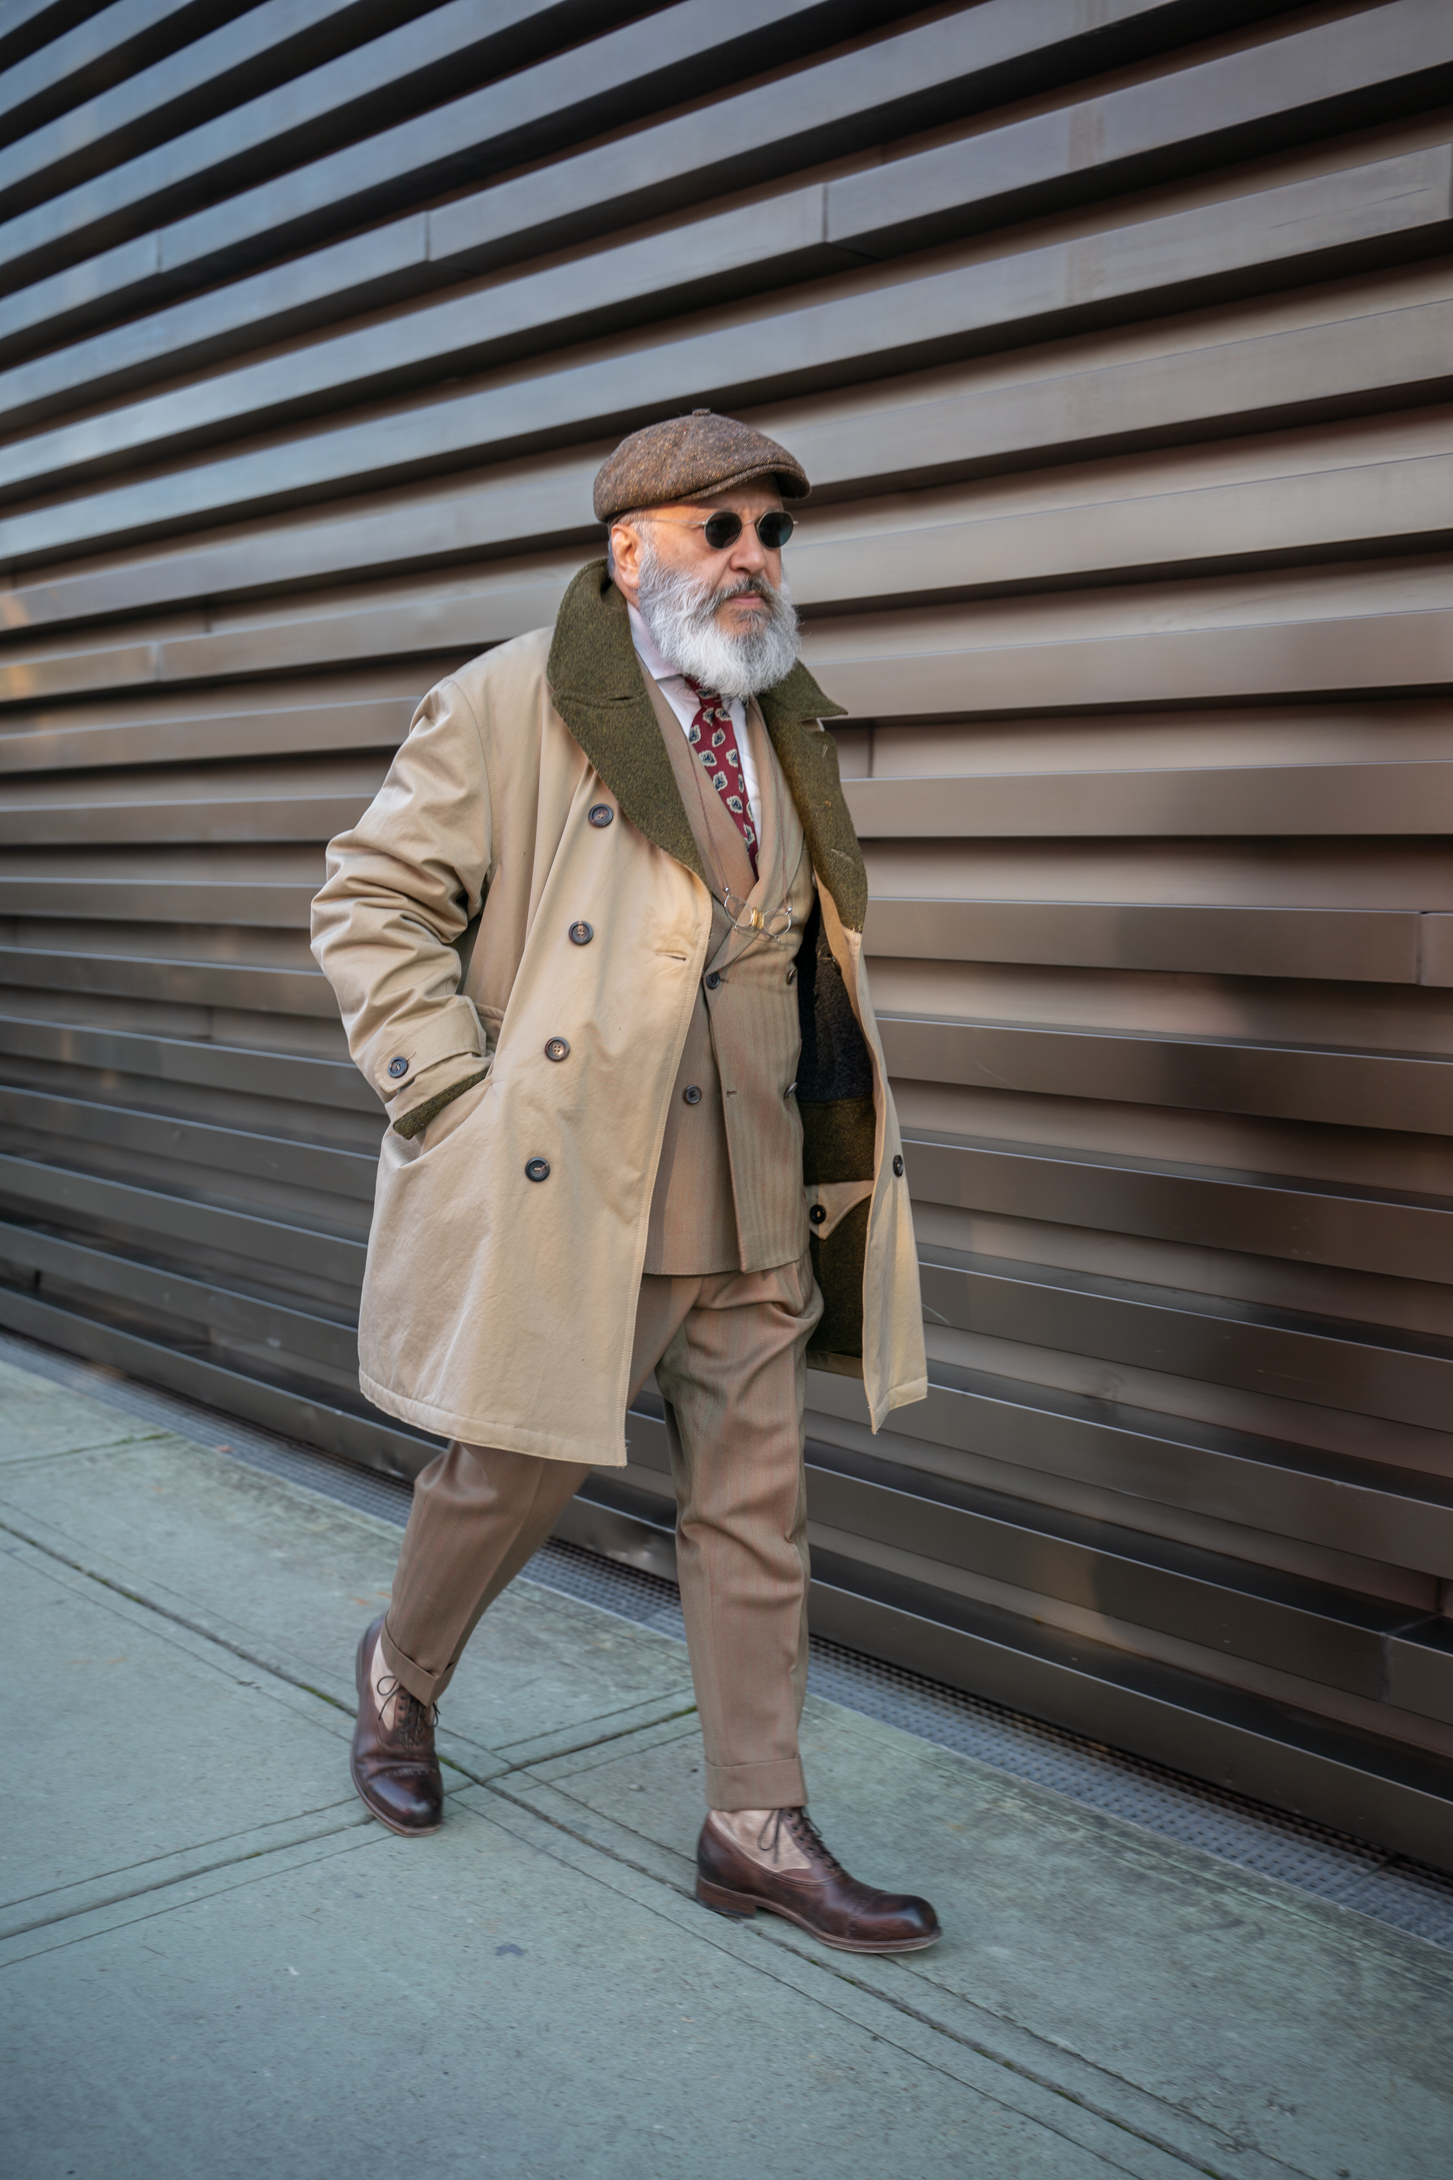 The Best Street Style From Pitti Uomo 97 - ICON